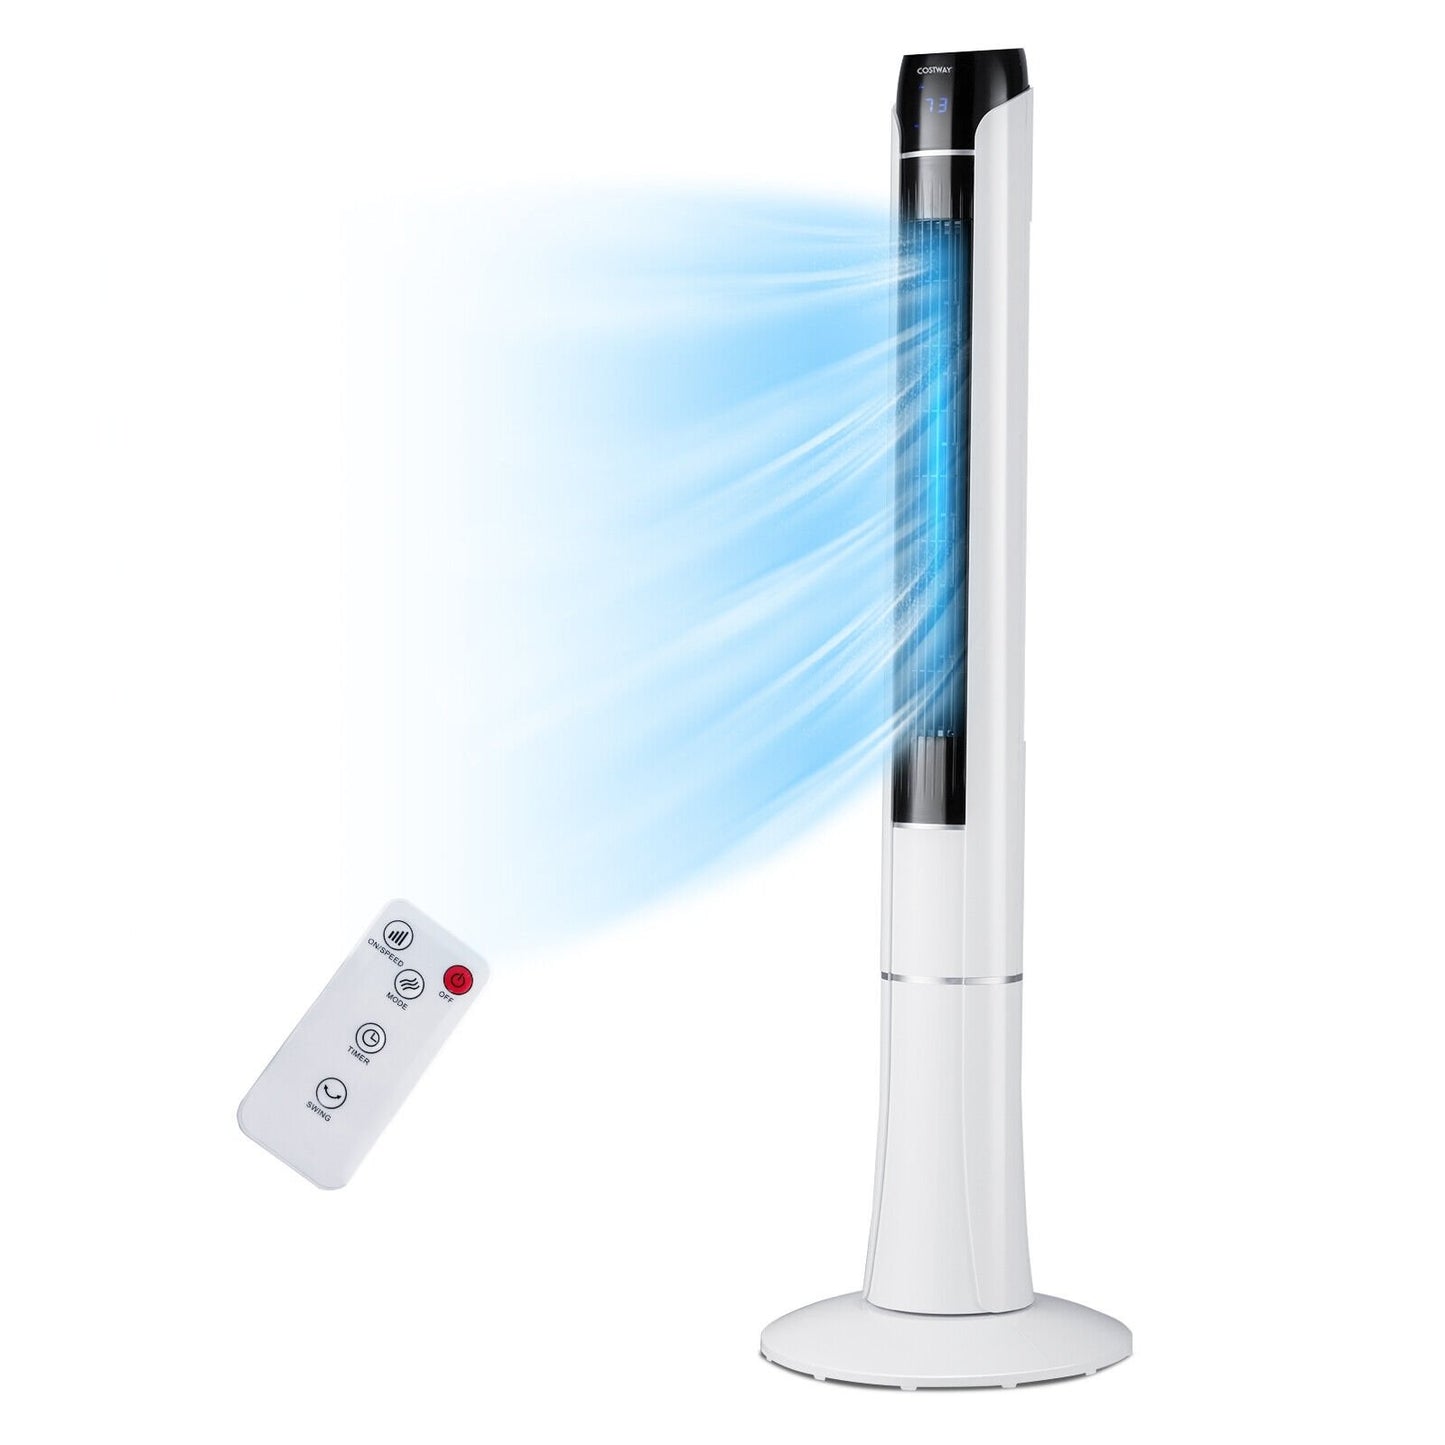 Portable 48 Inches Tower Fan with Remote Control, White